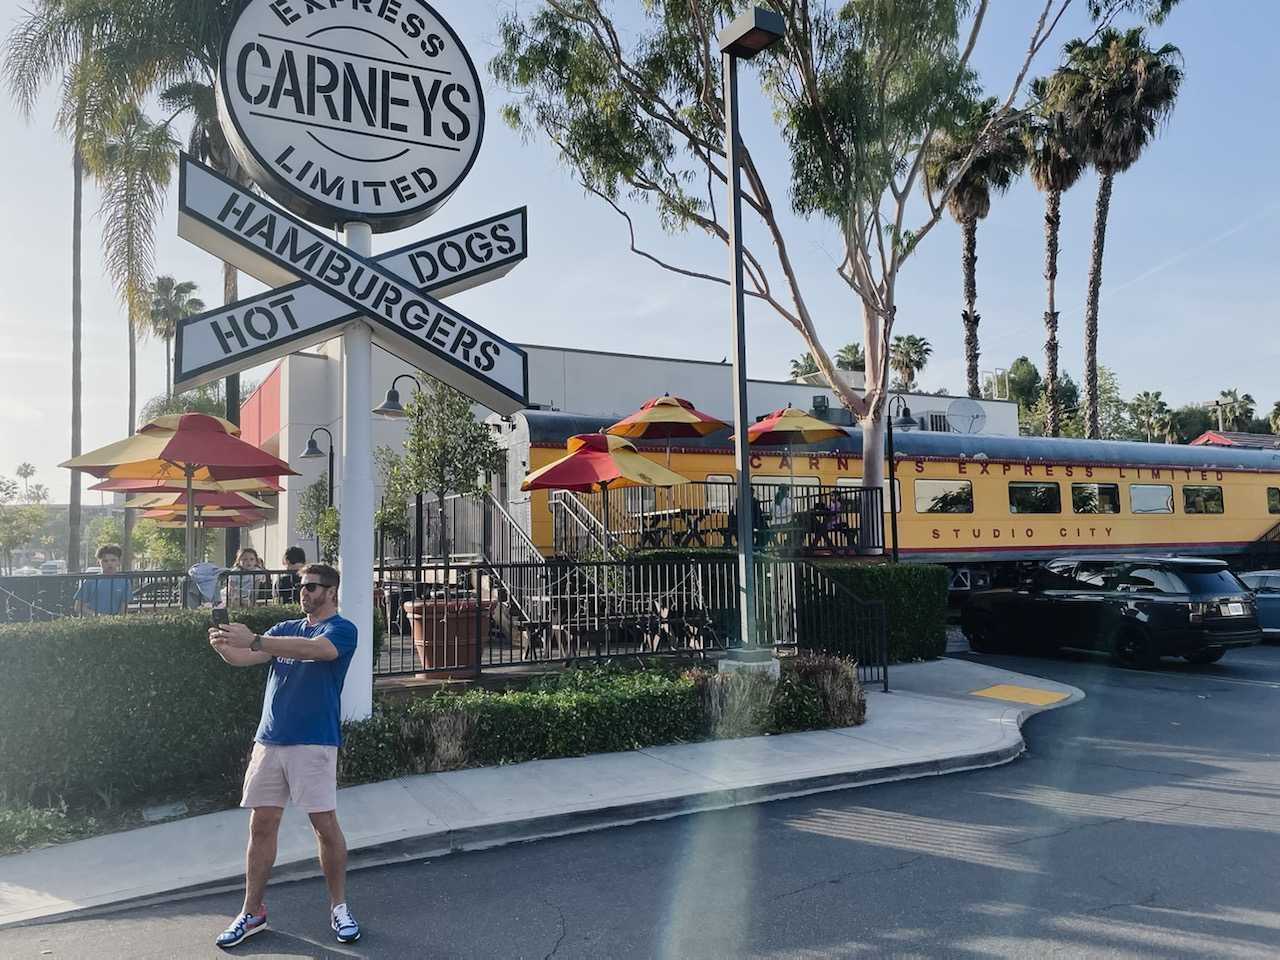 A man stands in front of Carney’s Restaurant while taking a selfie.